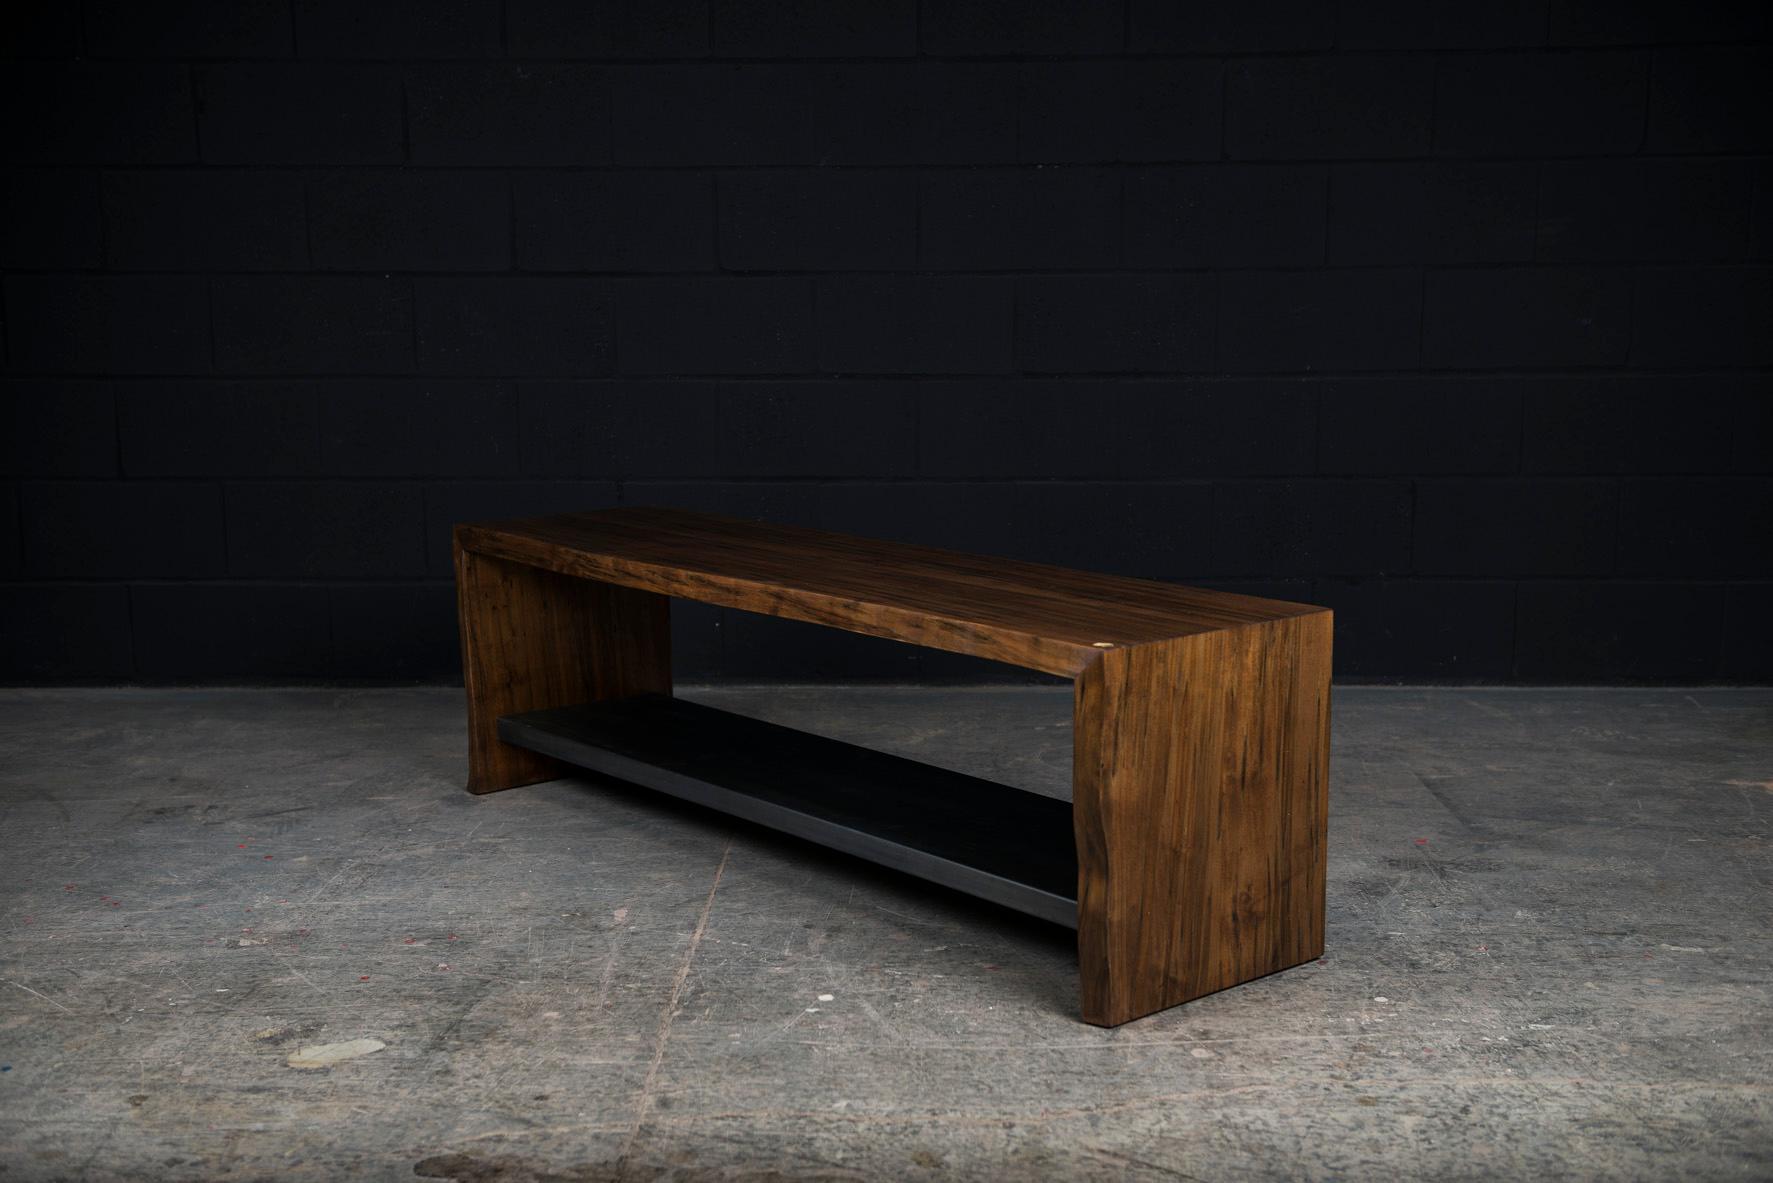 Canadian Live Edge Wood Bench, by Ambrozia, Oxidized Ambrosia Maple and Blackened Steel For Sale